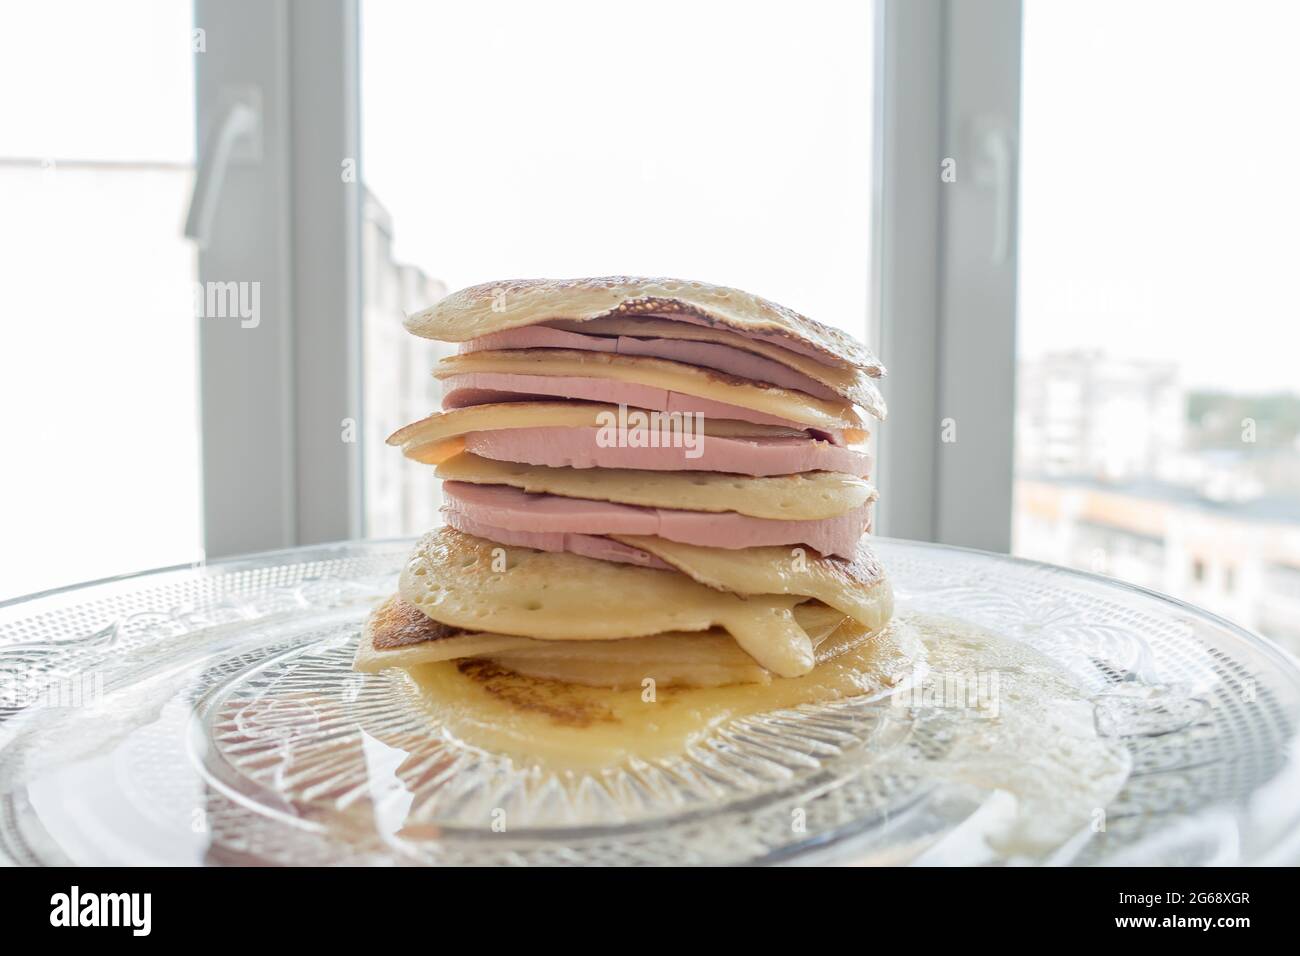 stack of pancakes with a layer of sausage pieces on a plate Stock Photo